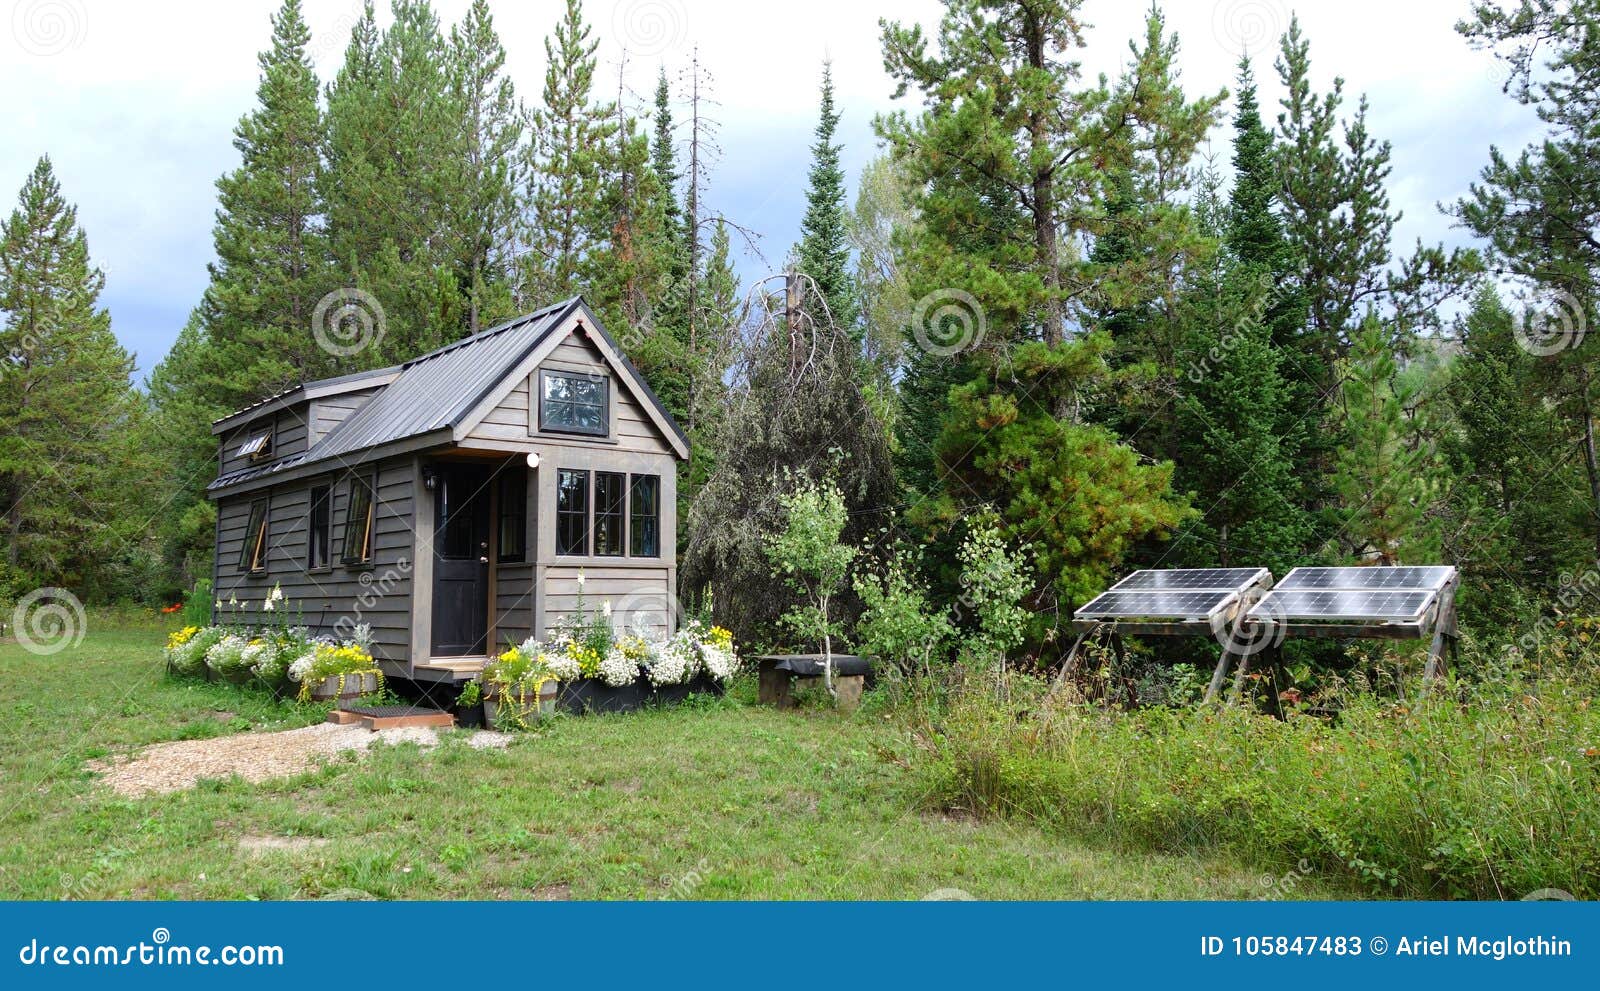 off grid tiny house in the mountains